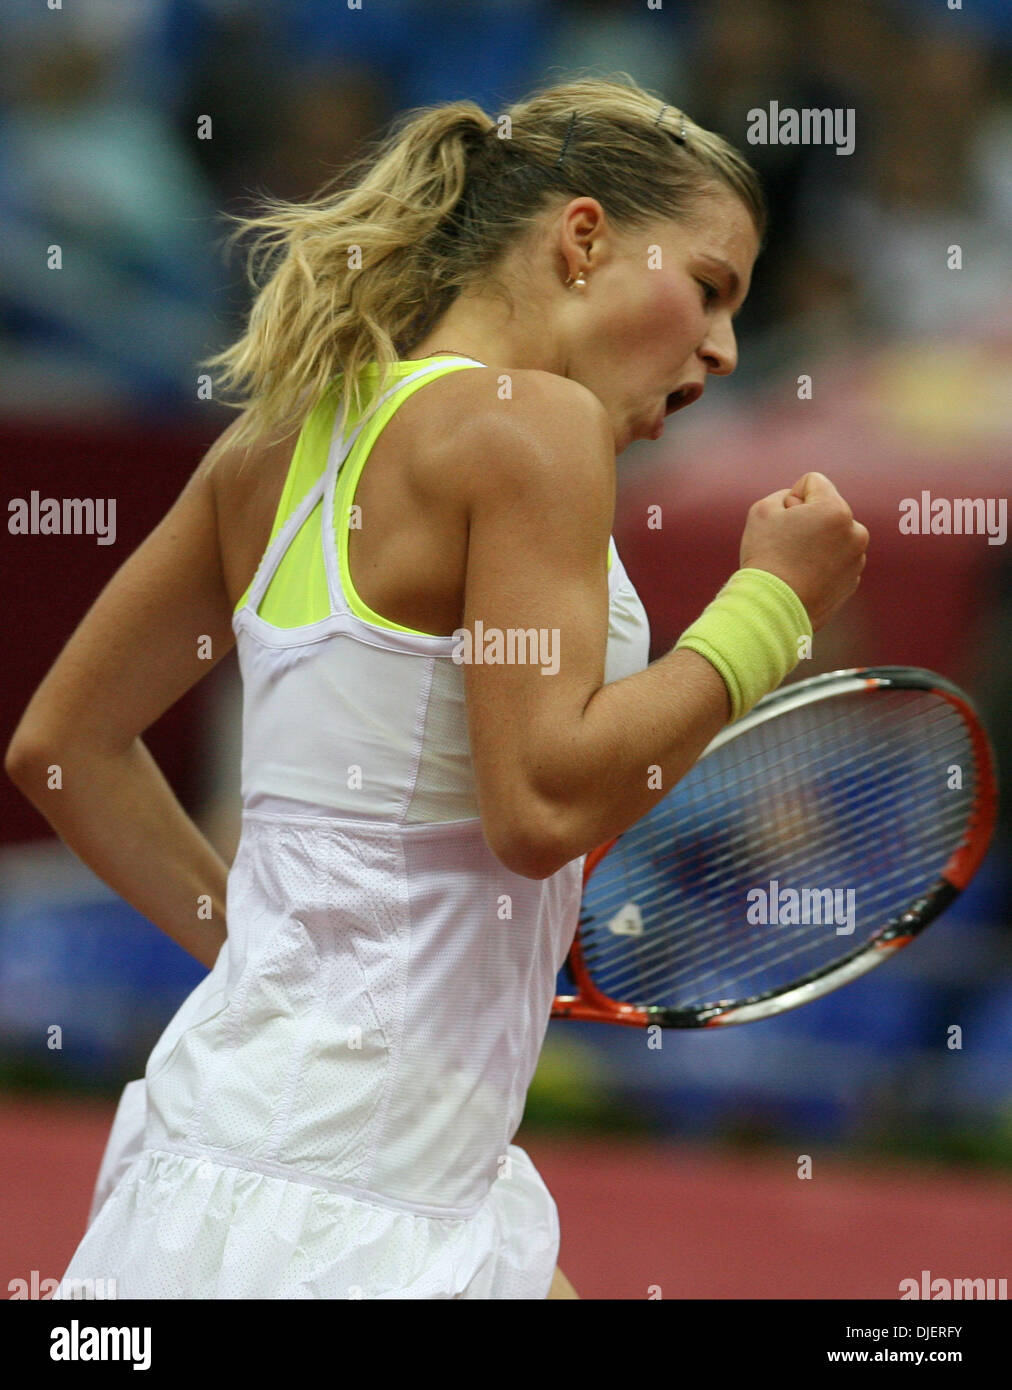 Oct 09, 2007 - Moscow, Russia - Russian tennis player MARIA KIRILENKO  during the 2007 Kremlin Cup tennis tournament in Moscow. (Credit Image: ©  PhotoXpress/ZUMA Press) RESTRICTIONS: North and South America RIGHTS ONLY!  Stock Photo - Alamy